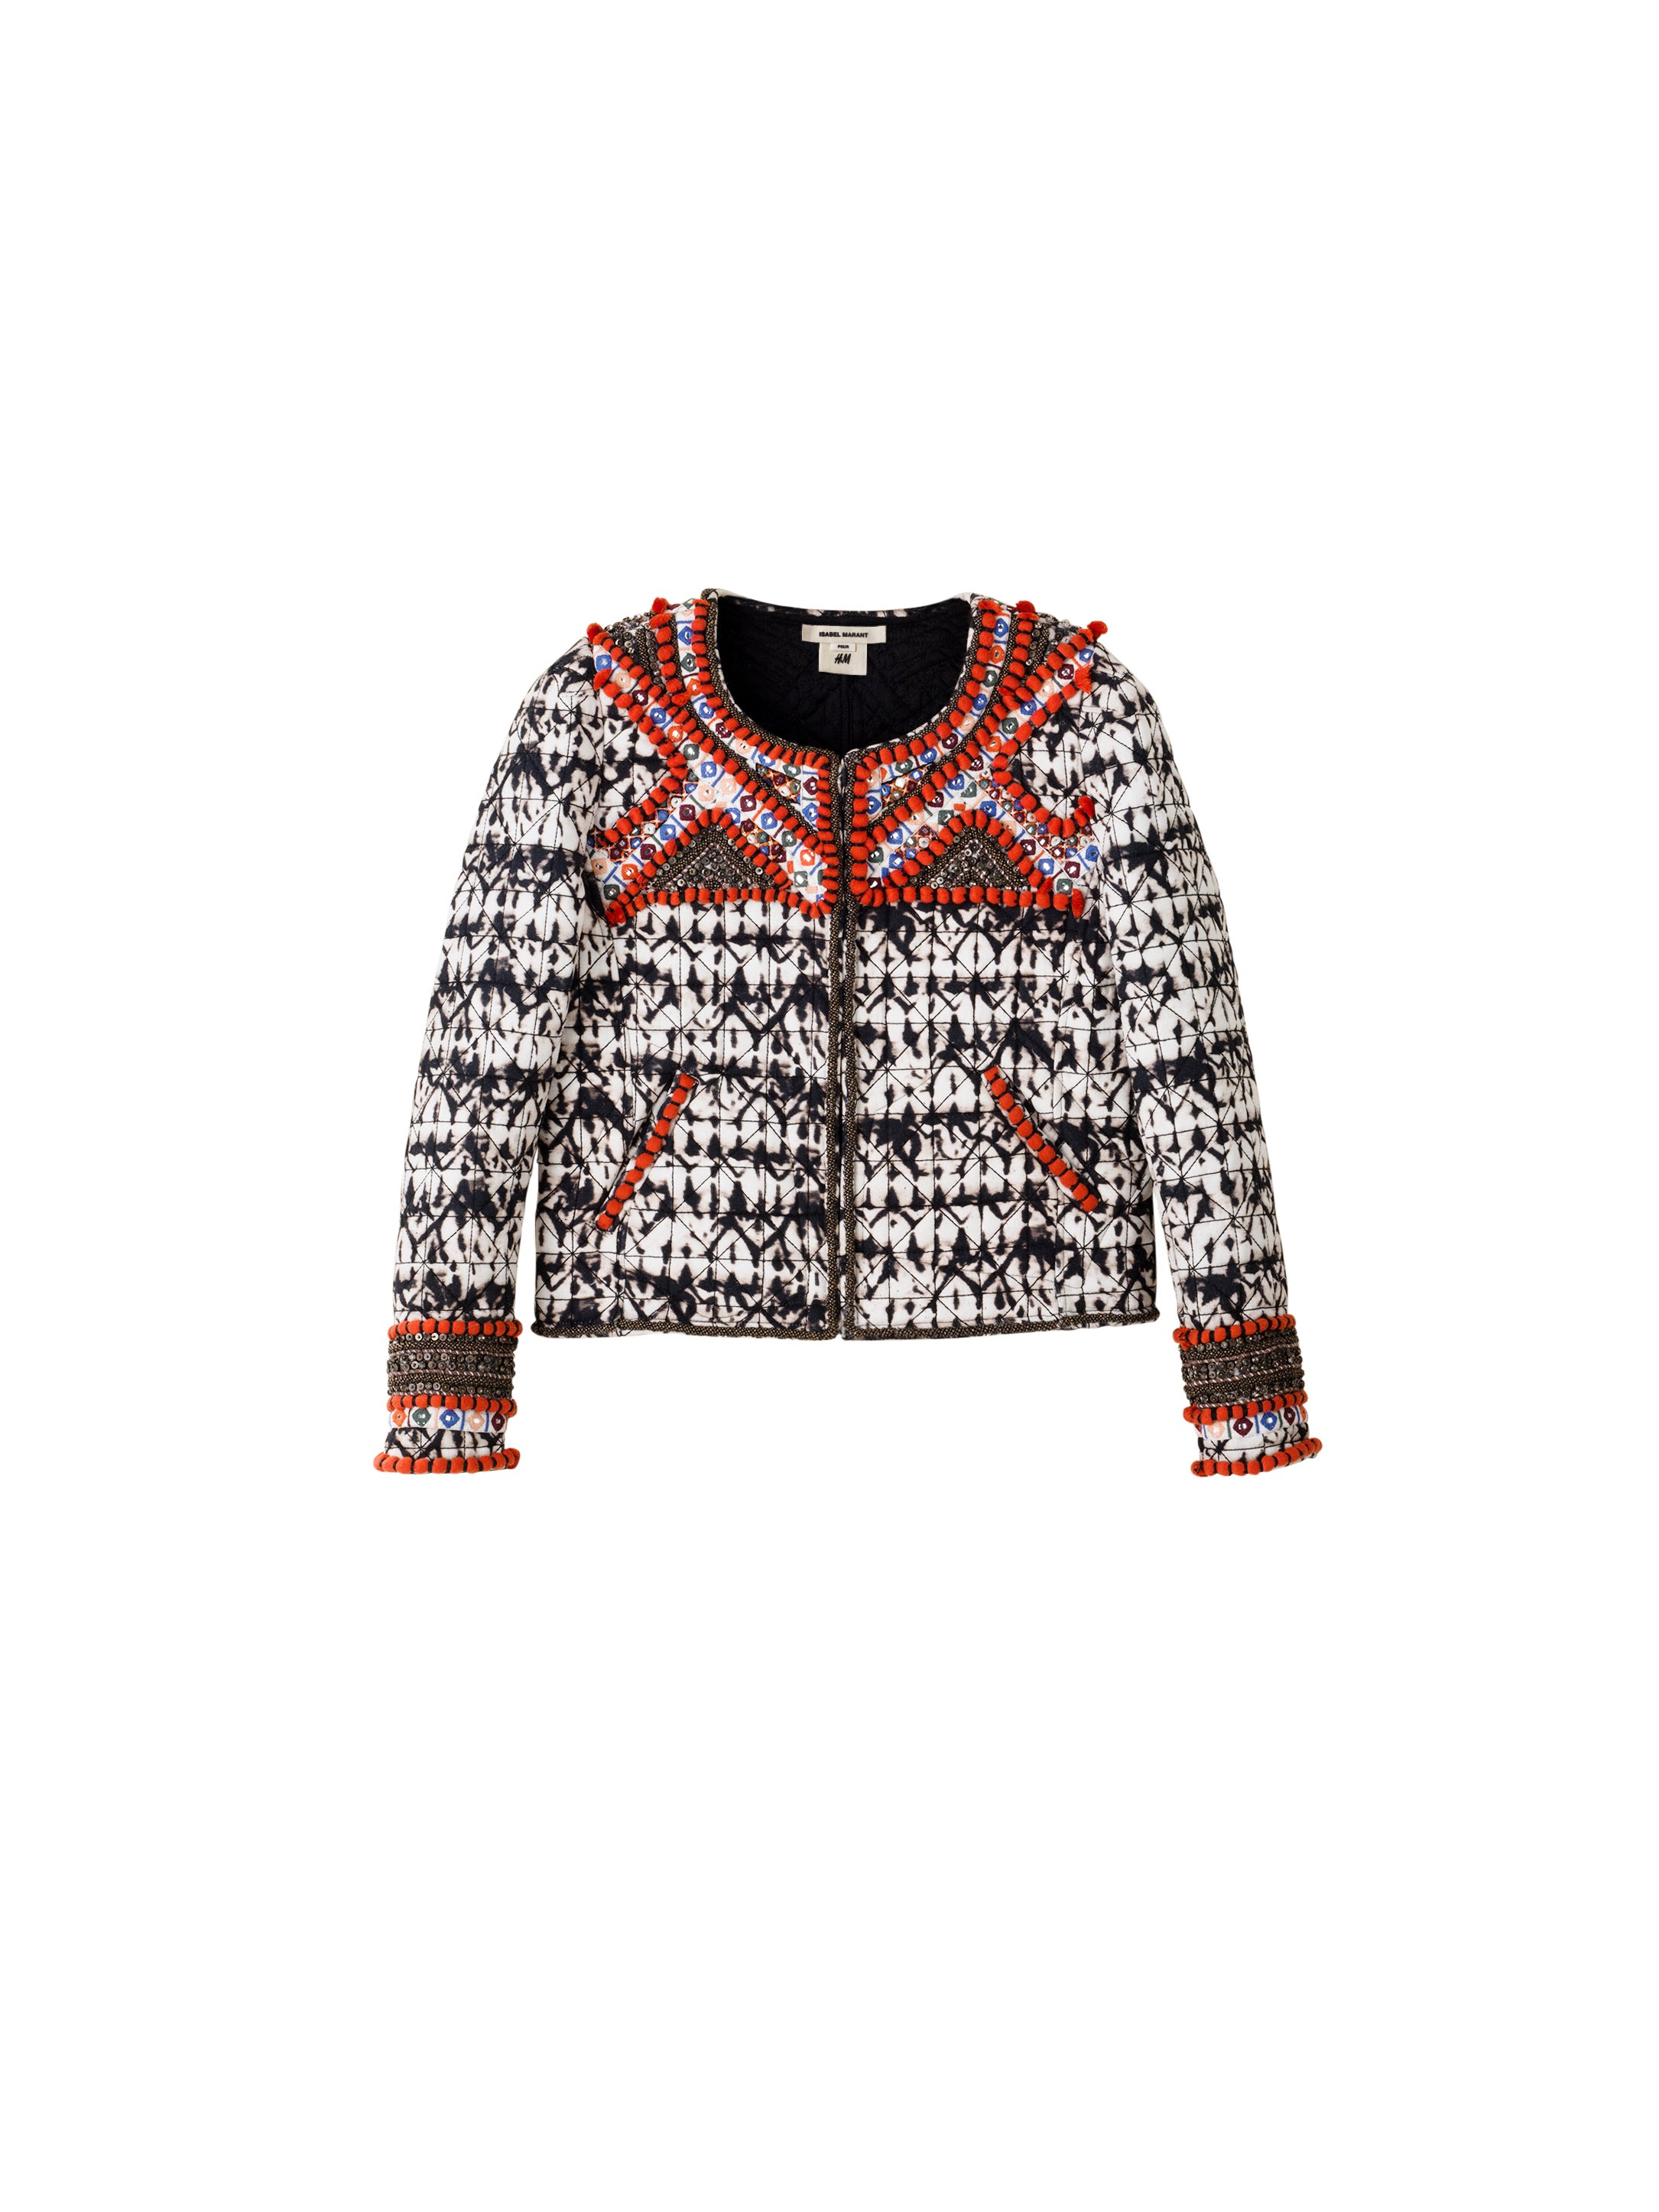 5 Pieces We're Coveting From The Isabel Marant For H&M Collection